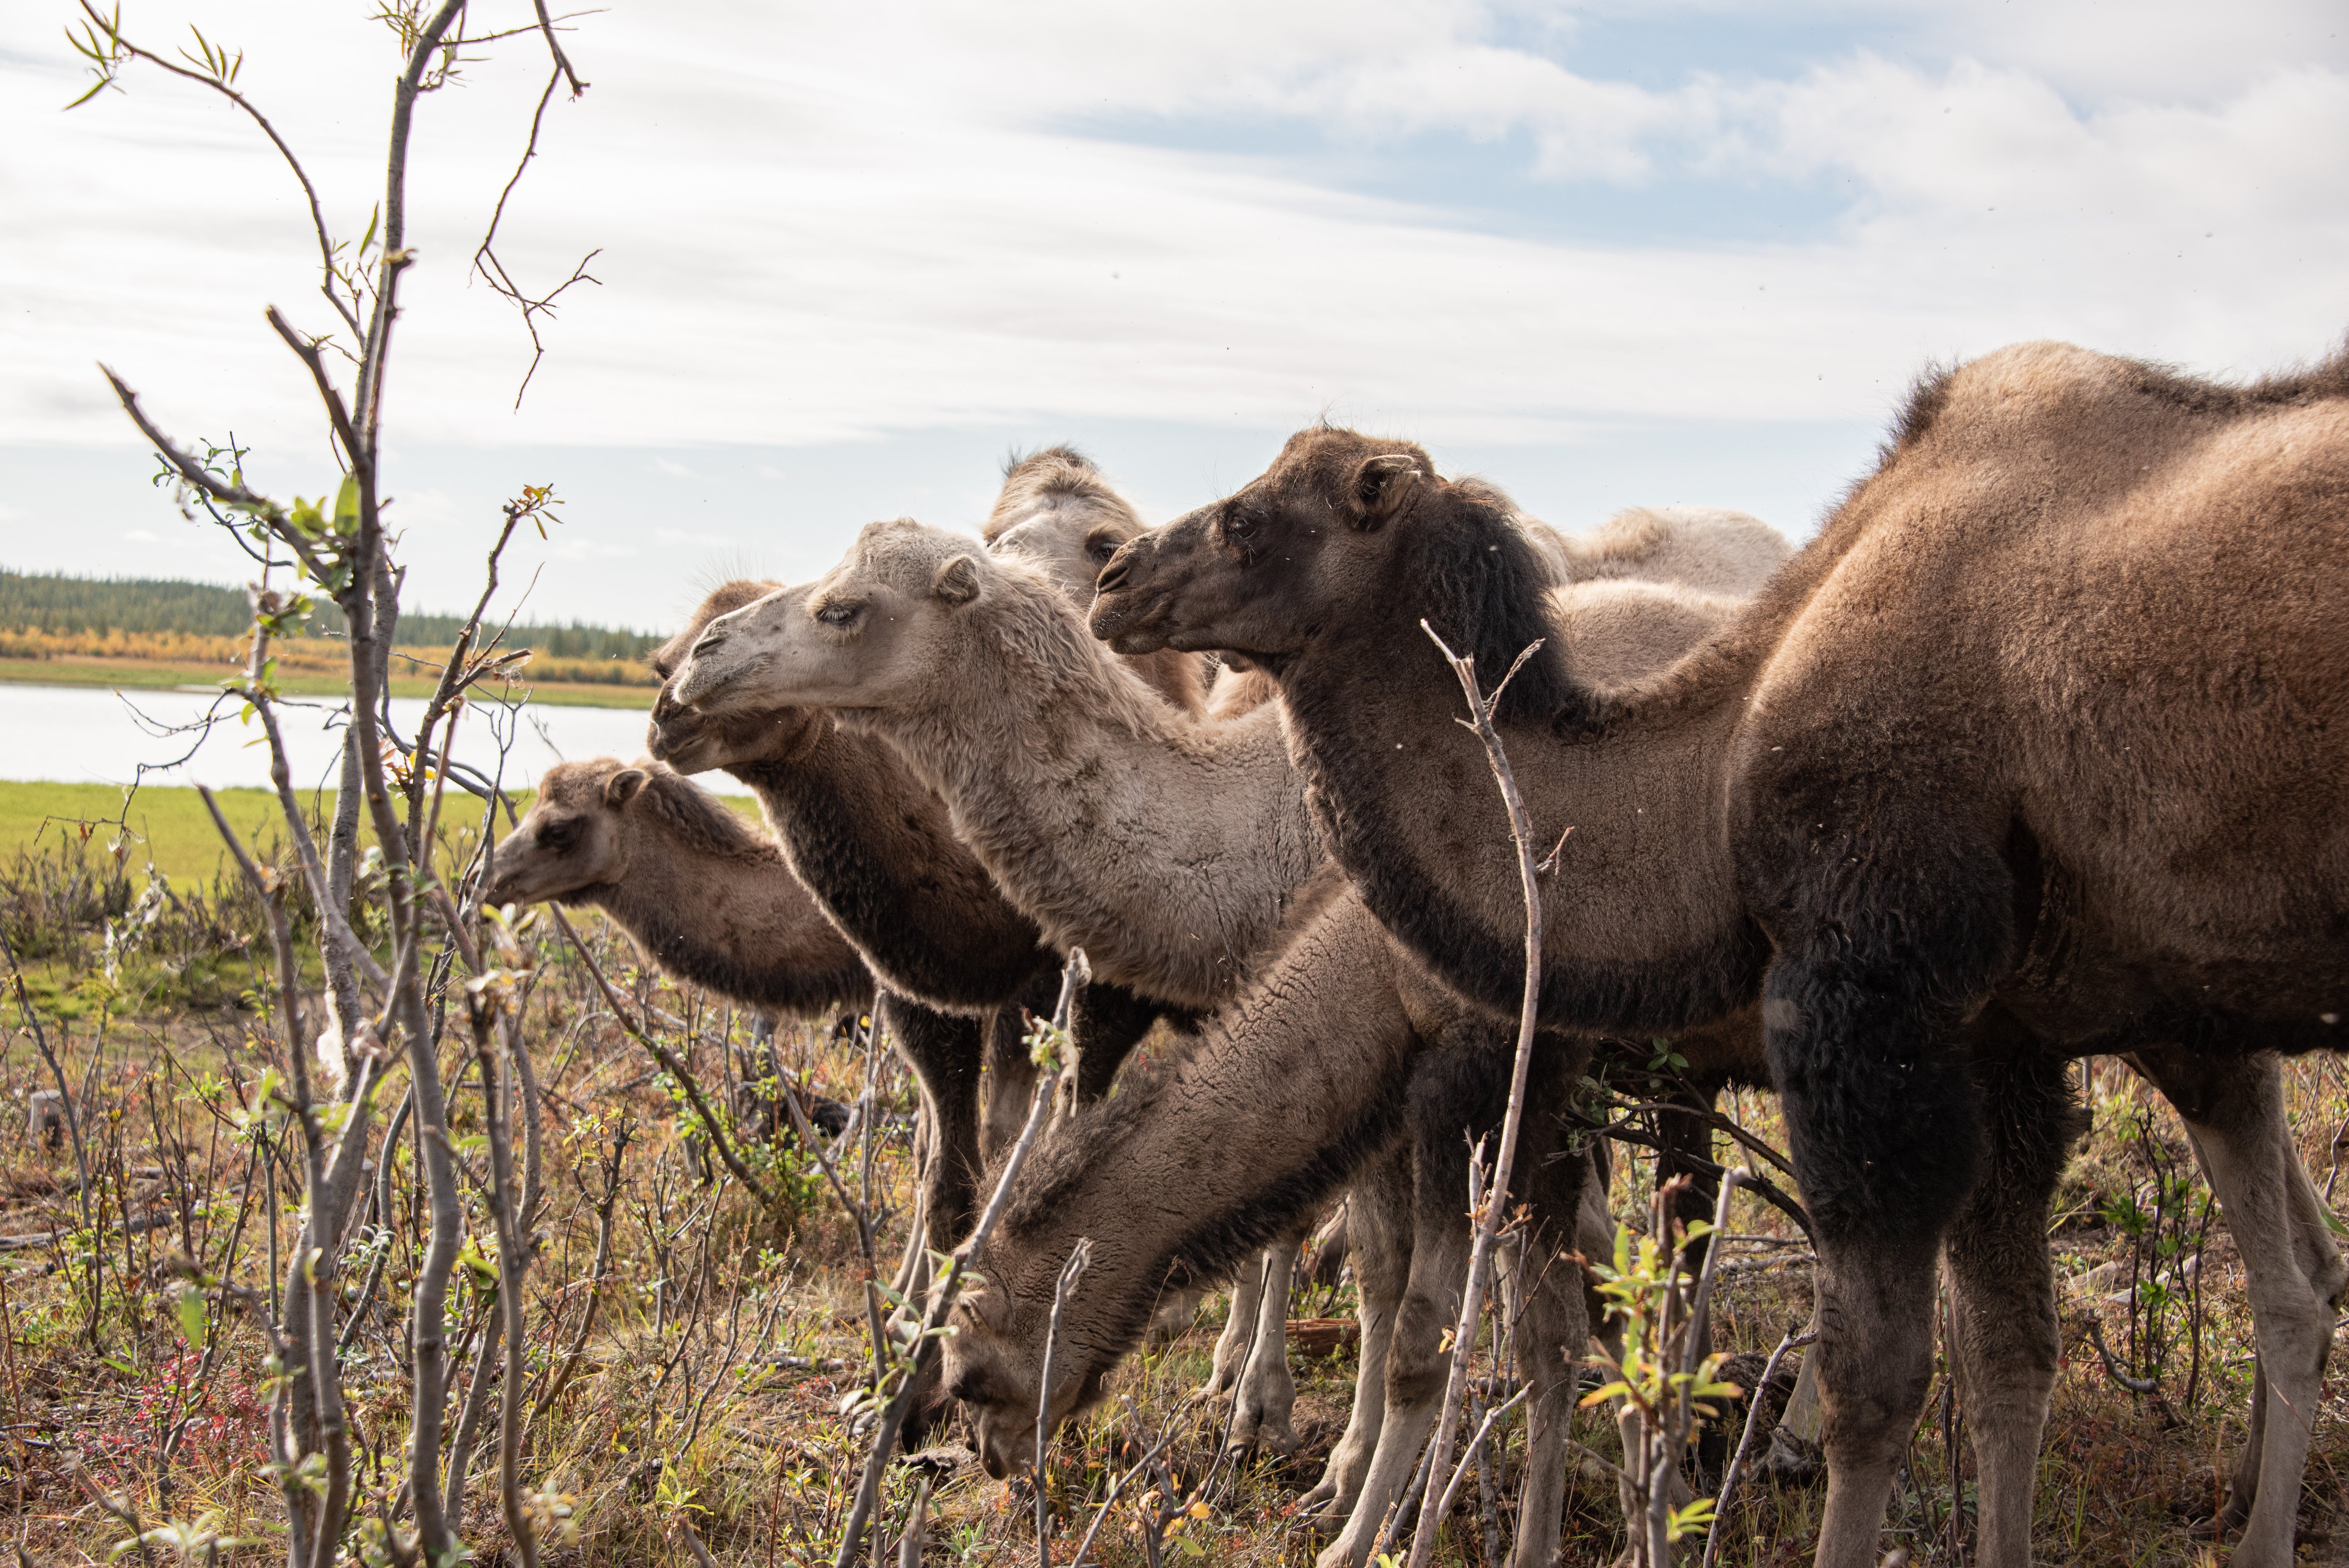 Camels clear the way for grasslands by eating the shrub